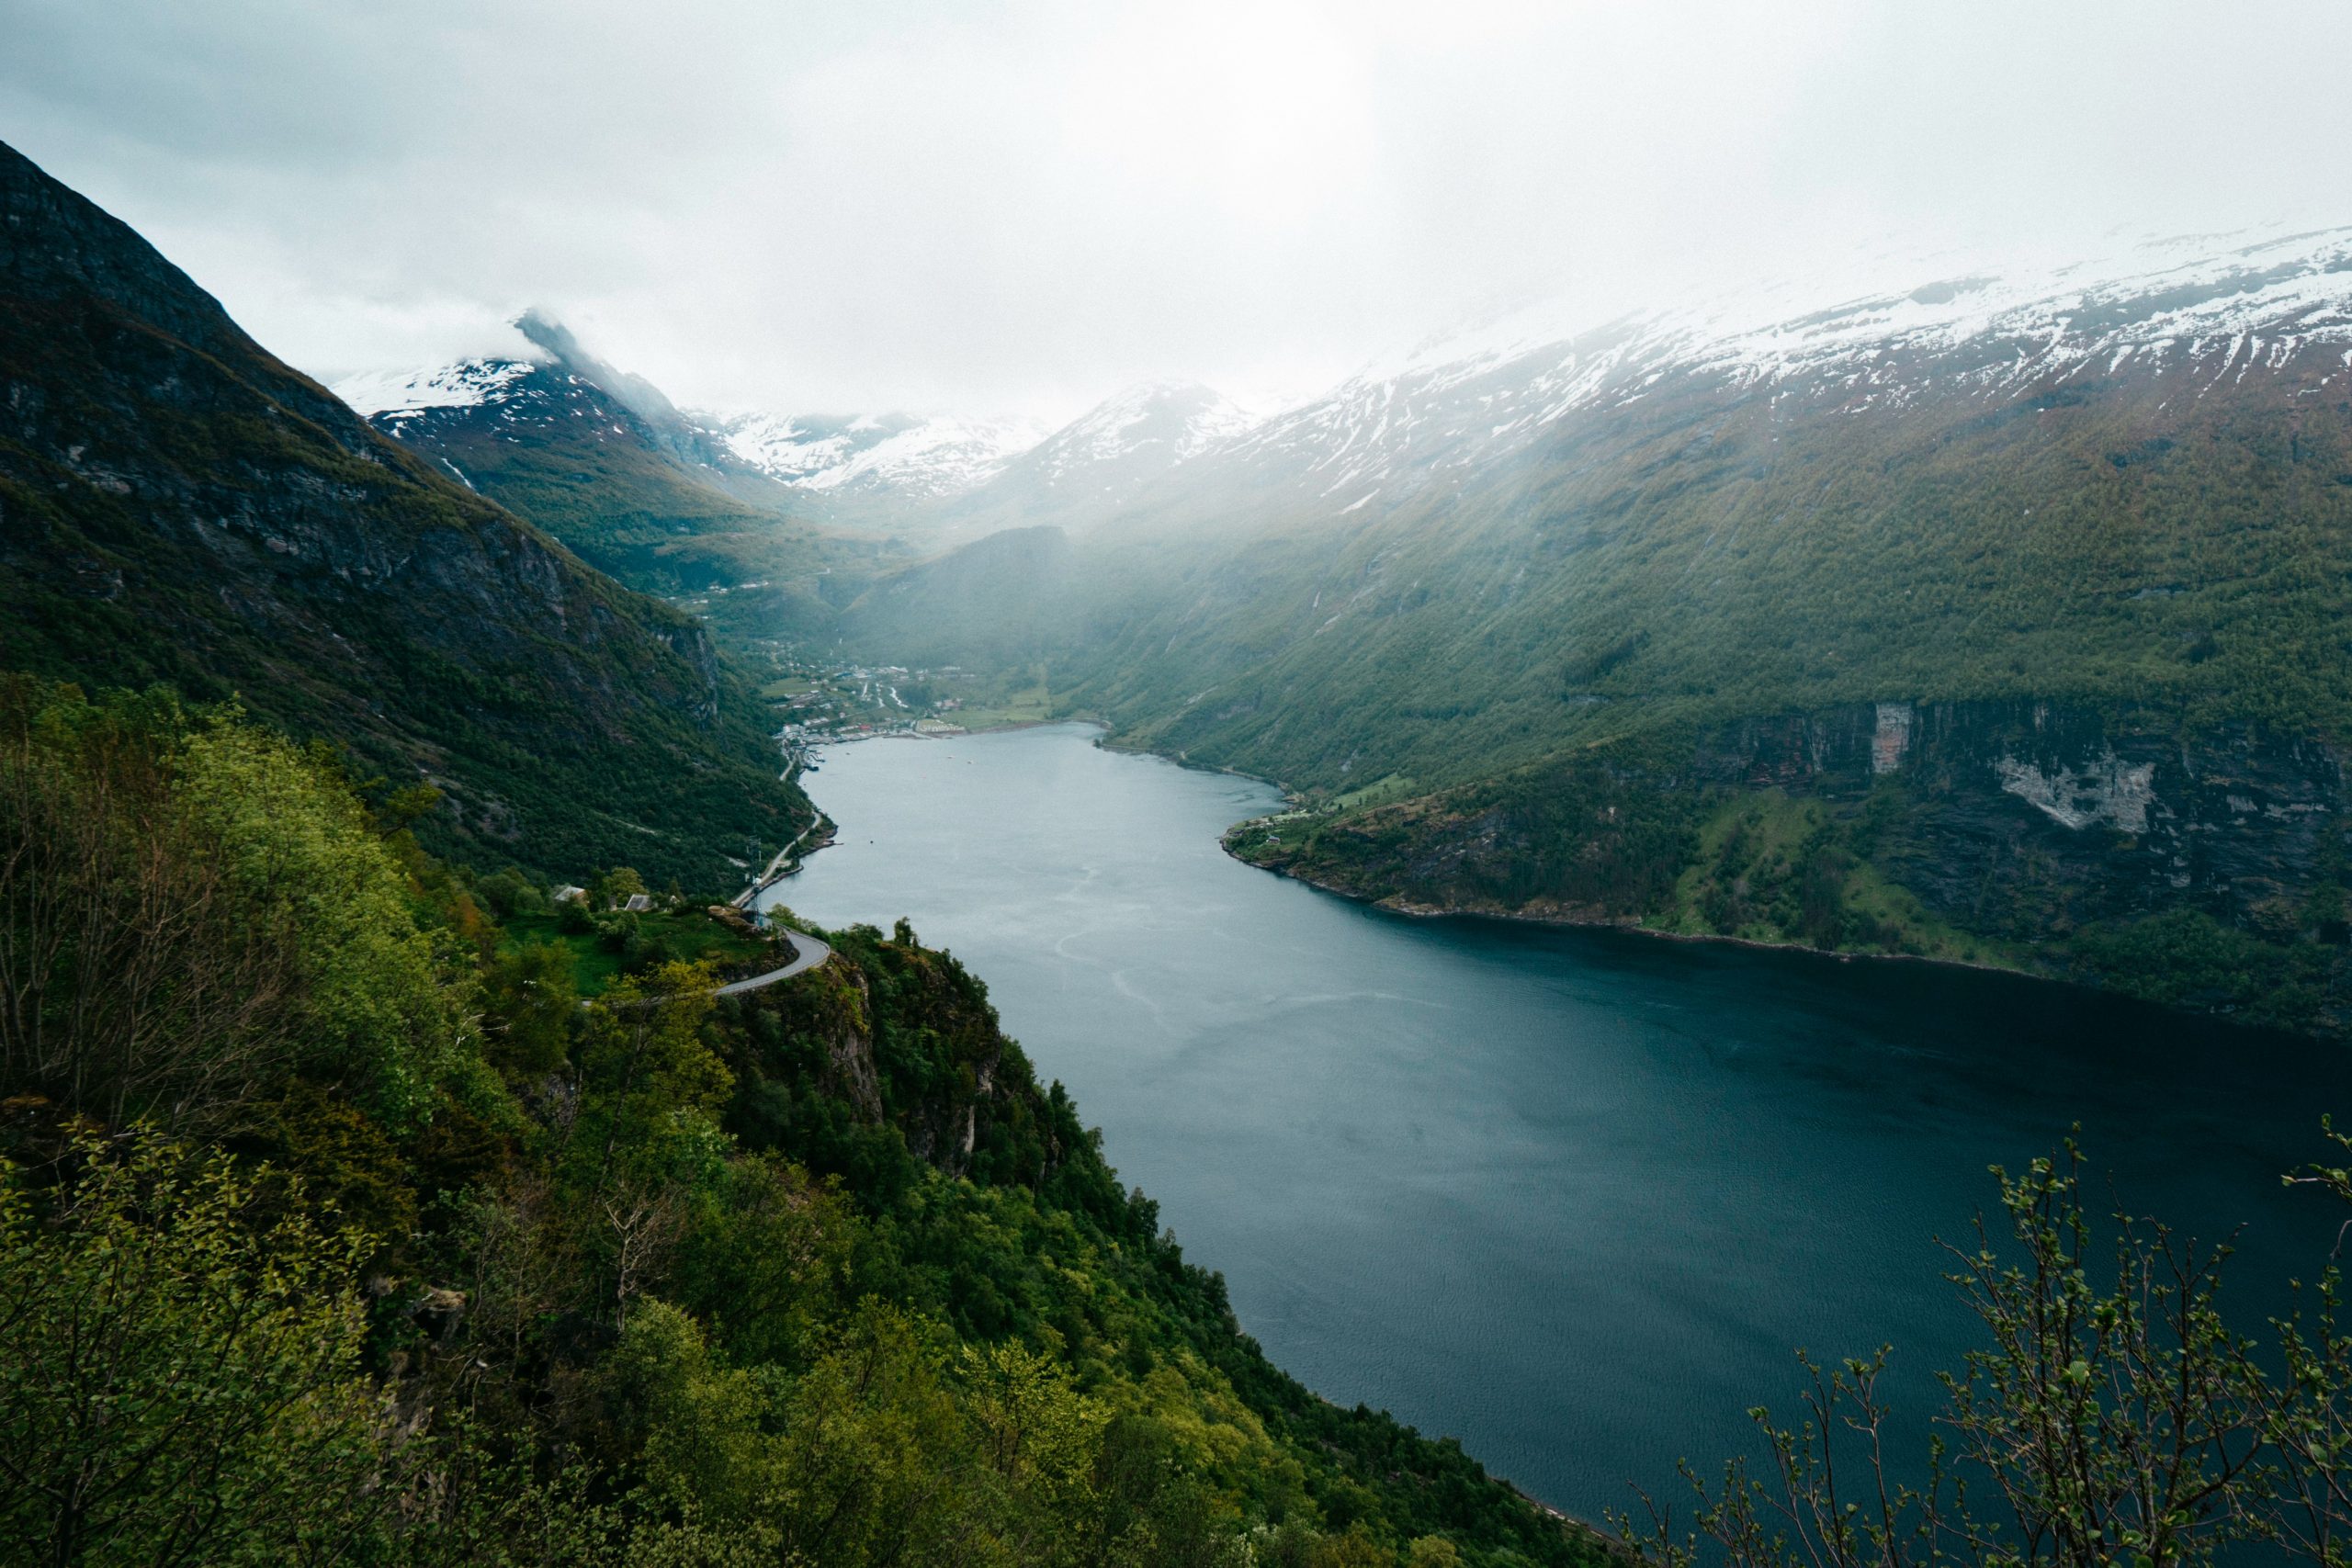 discover the stunning fjords of norway and immerse yourself in the natural beauty of the scandinavian landscape.